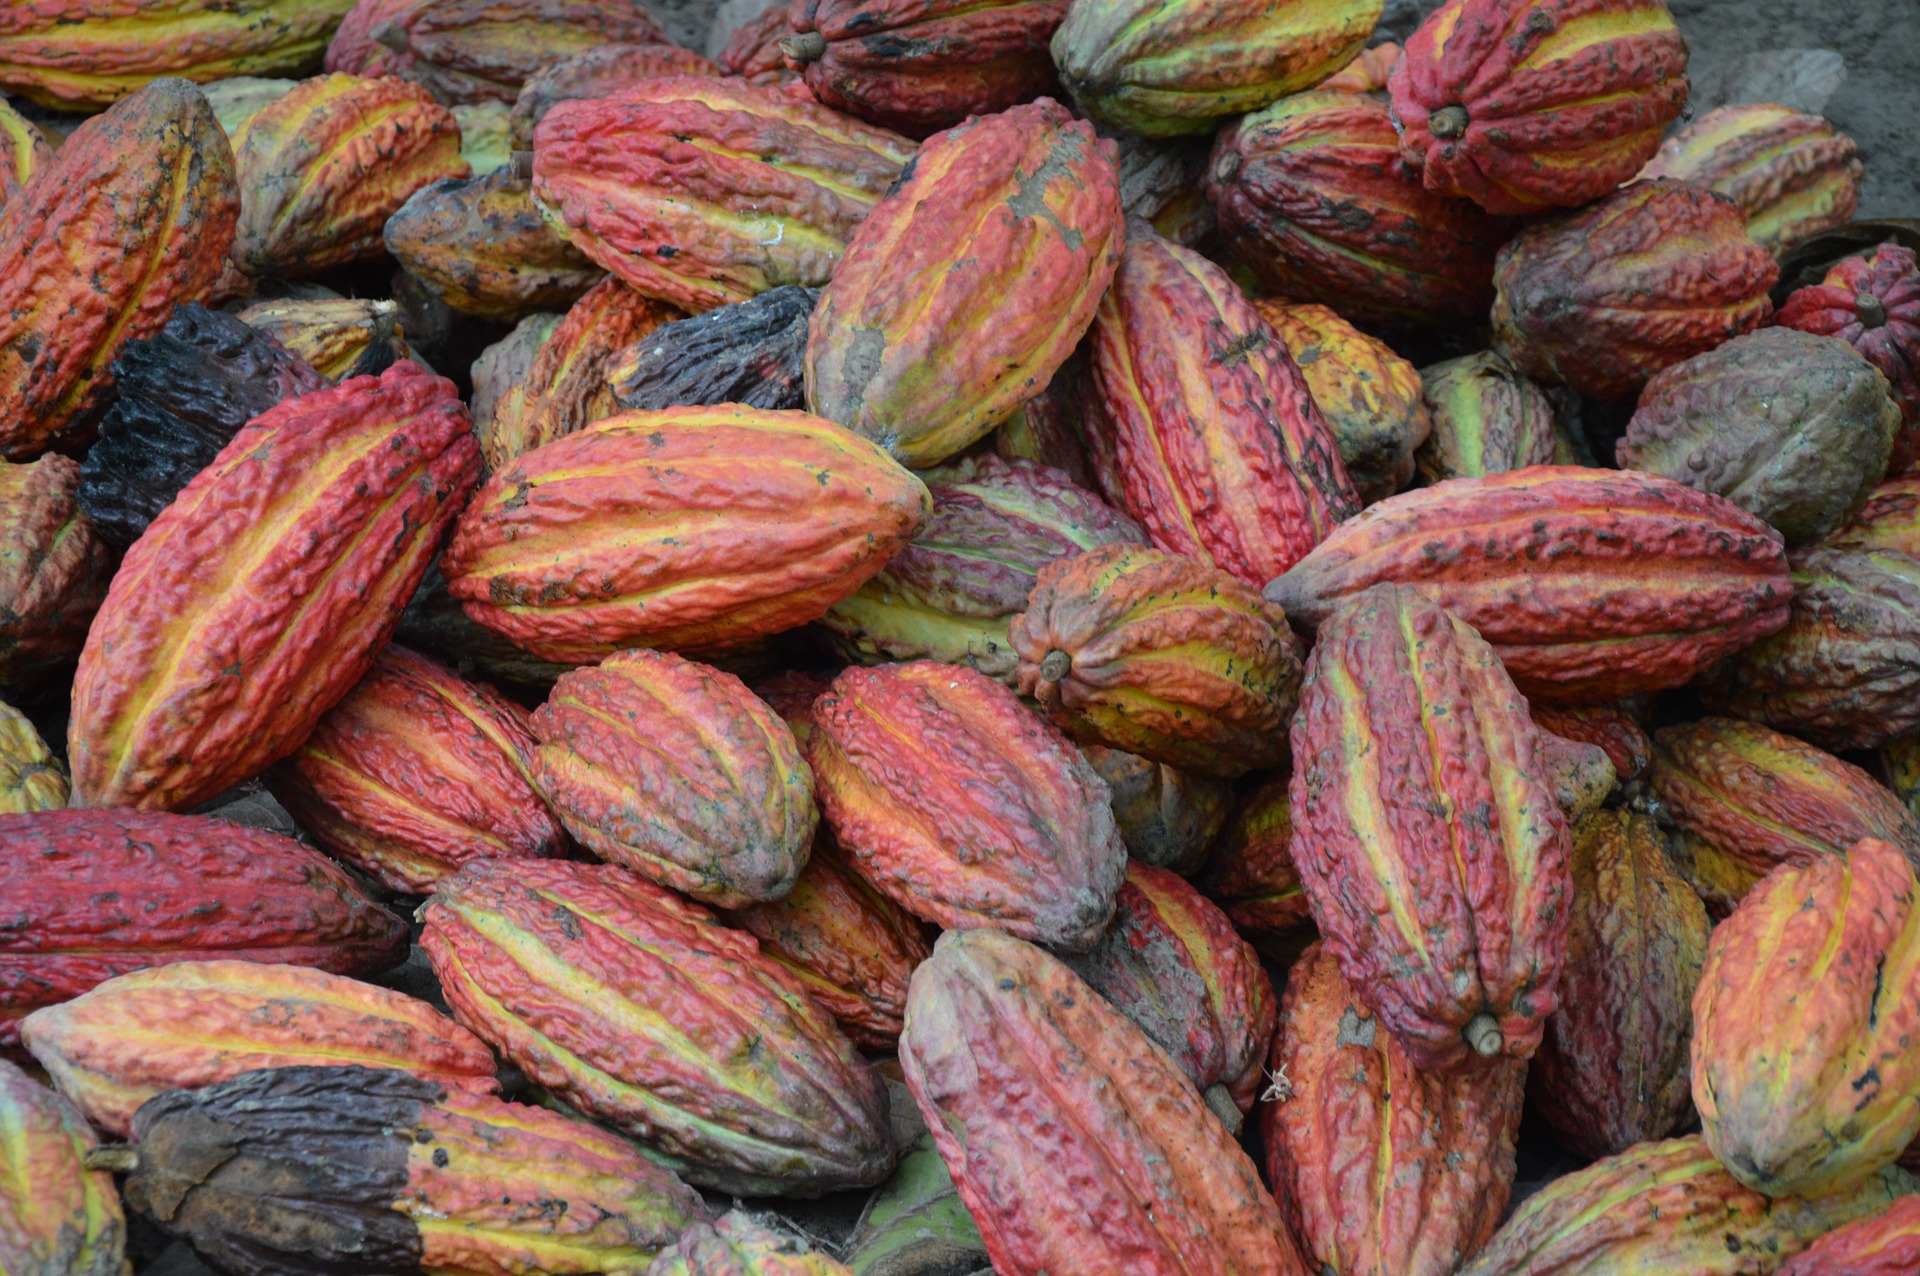 Indonesia’s cocoa exports recorded at 549 million USD during January-June 2020